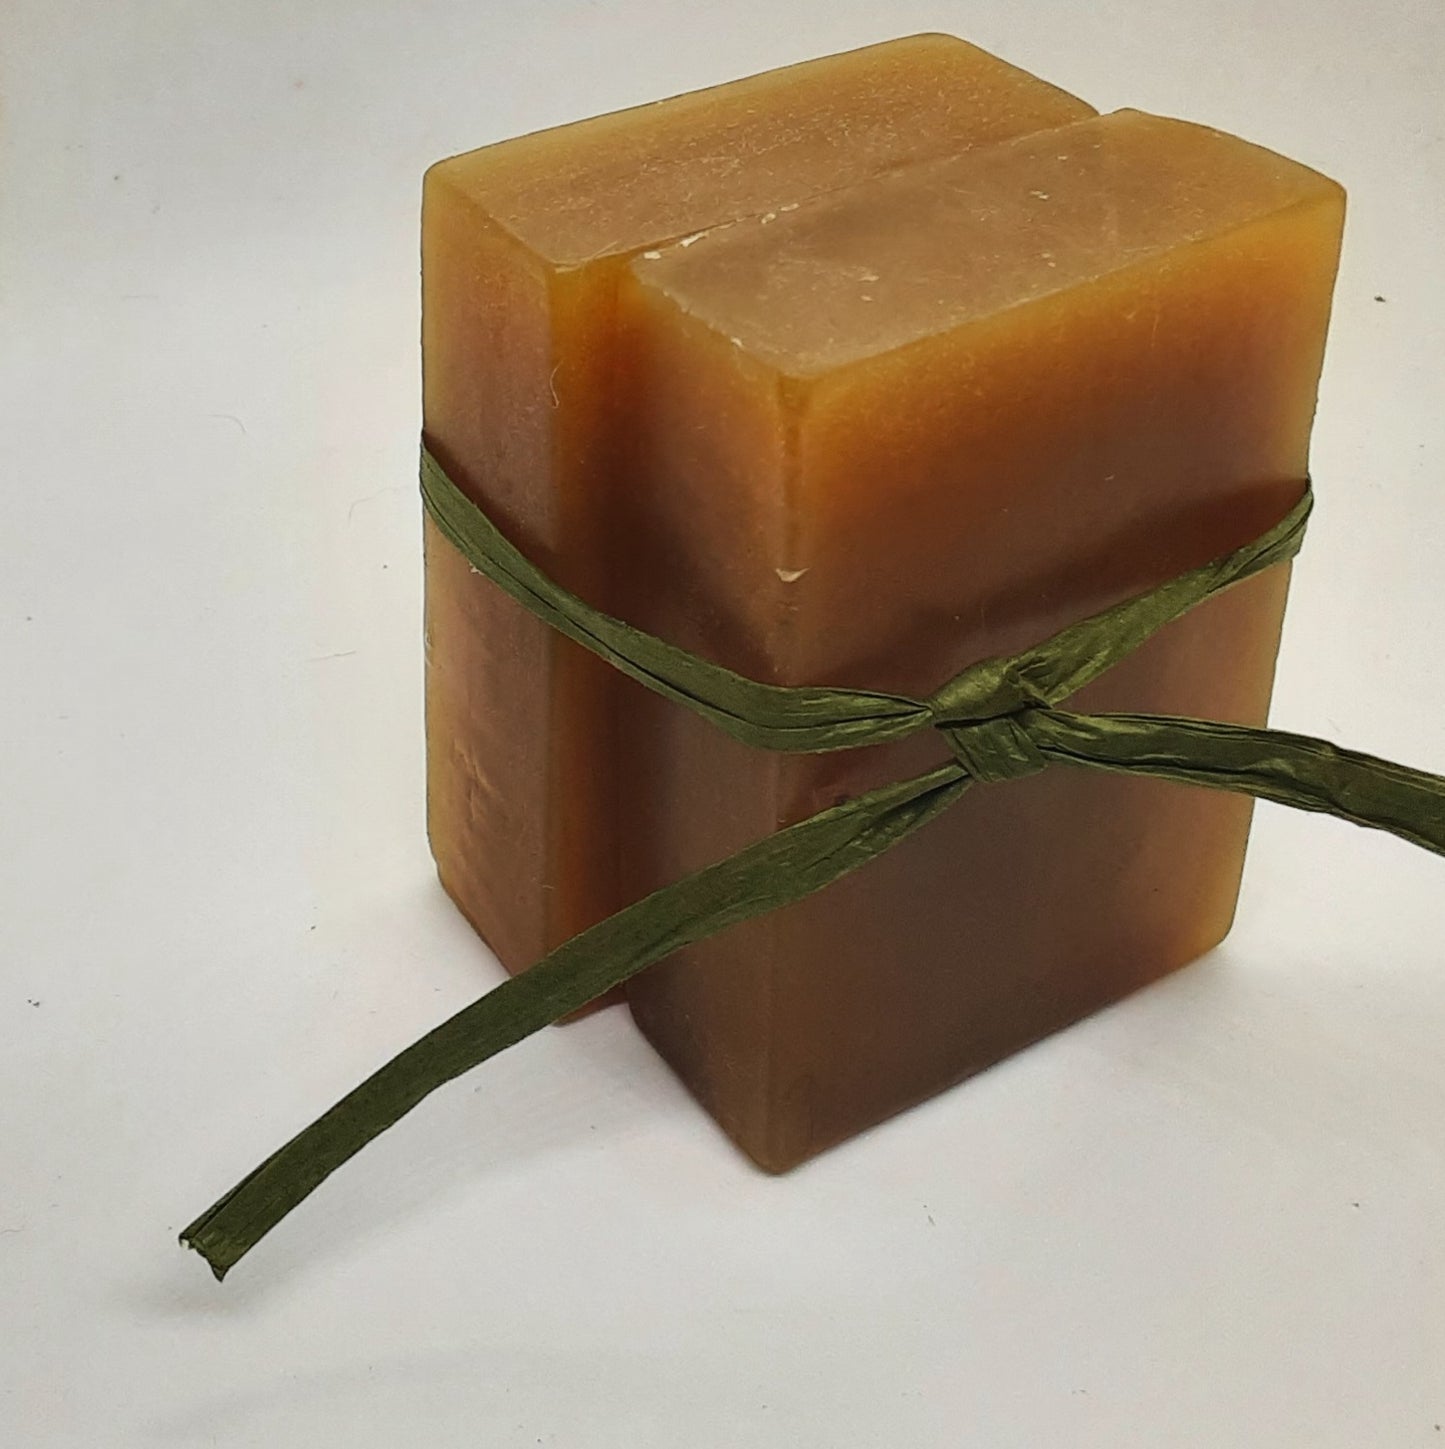 Real Beer Soap - Spiced Honey Ale - Naturally Coloured, SLS and SLSA Free